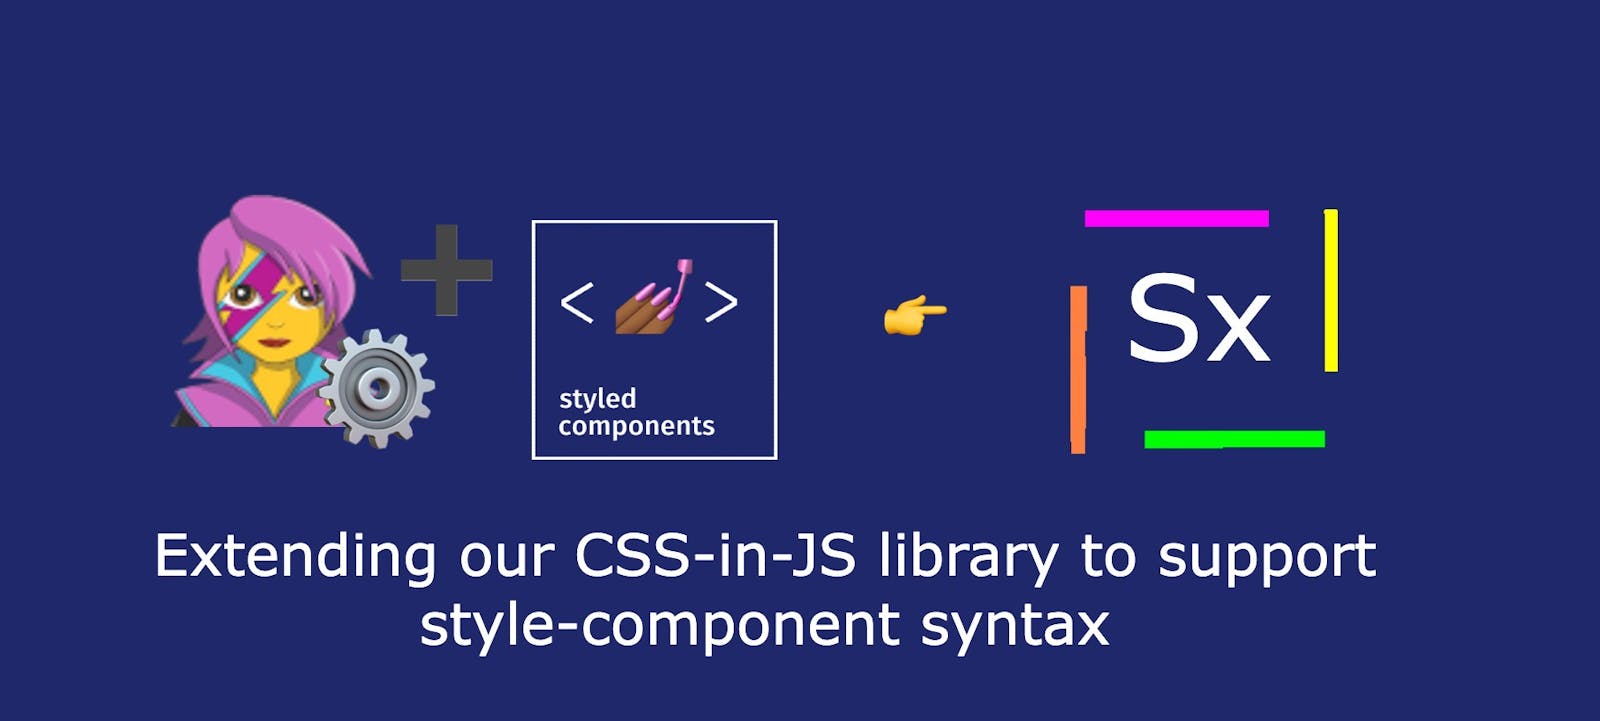 Extending our CSS-in-JS to support style-component syntax